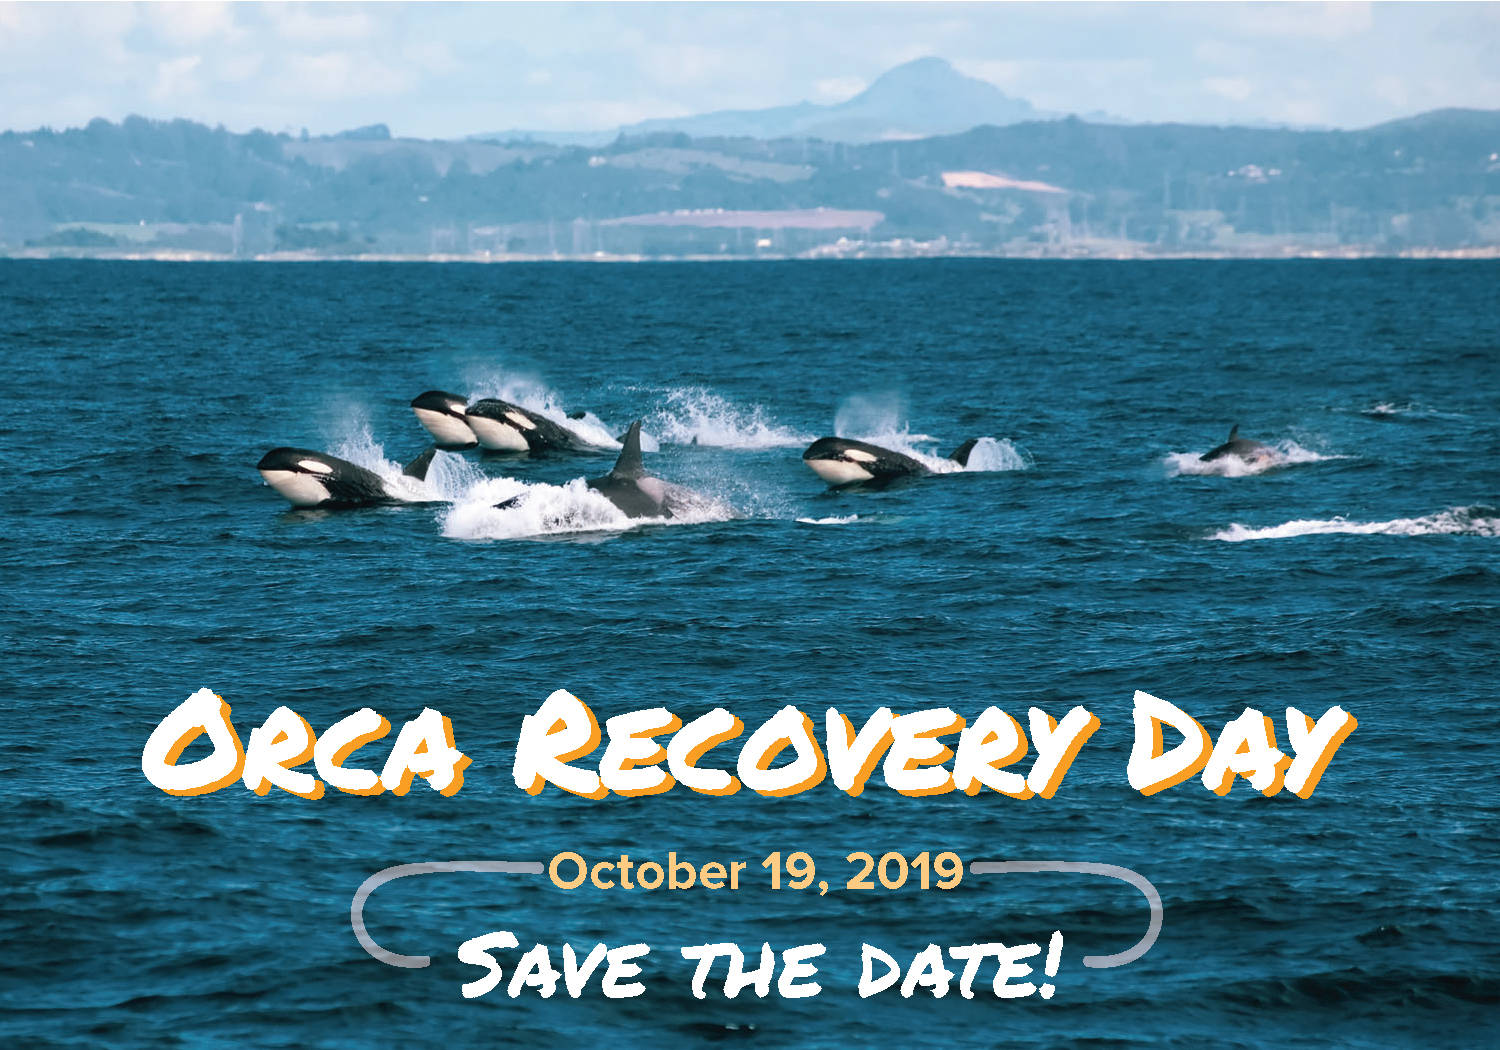 Conservation district to hold event in honor of orcas